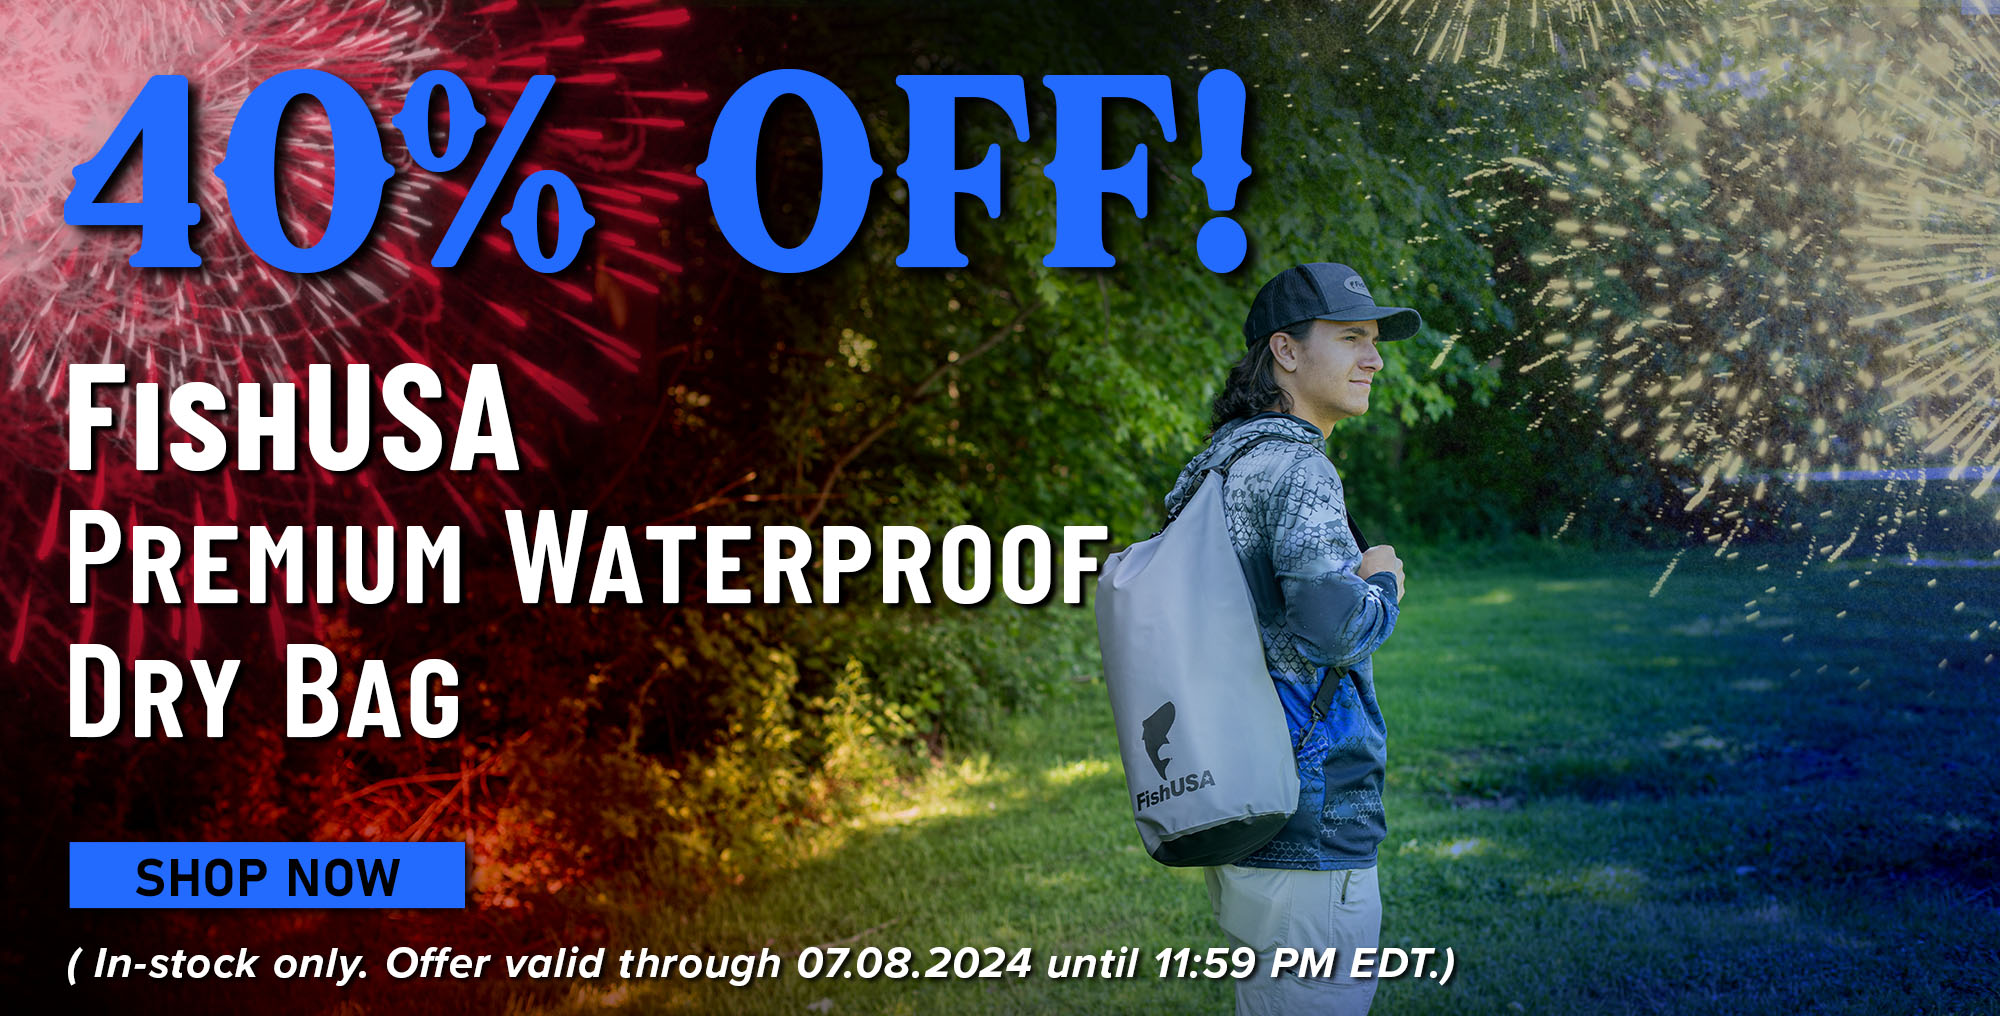 40% Off! FishUSA Premium Waterproof Dry Bag Shop Now (In-stock only. Offer valid through 07.08.2024 until 11:59 PM EDT.)